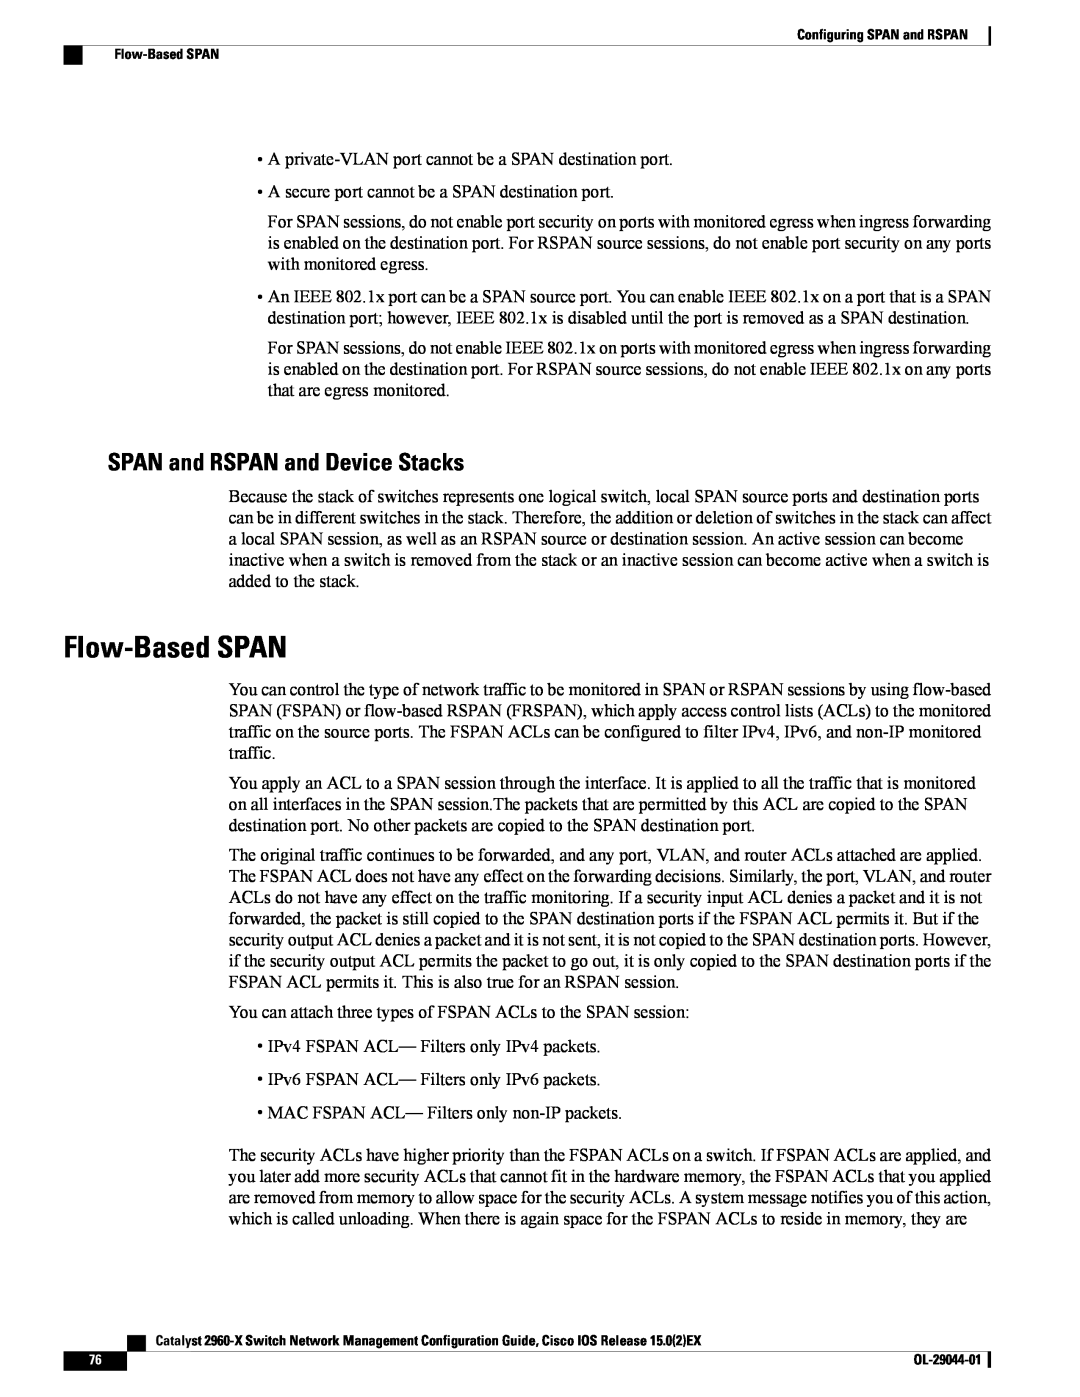 Cisco Systems WSC2960X24PDL, WSC2960X24TDL, WSC2960X48TSL, WSC2960X24PSL Flow-Based SPAN, SPAN and RSPAN and Device Stacks 